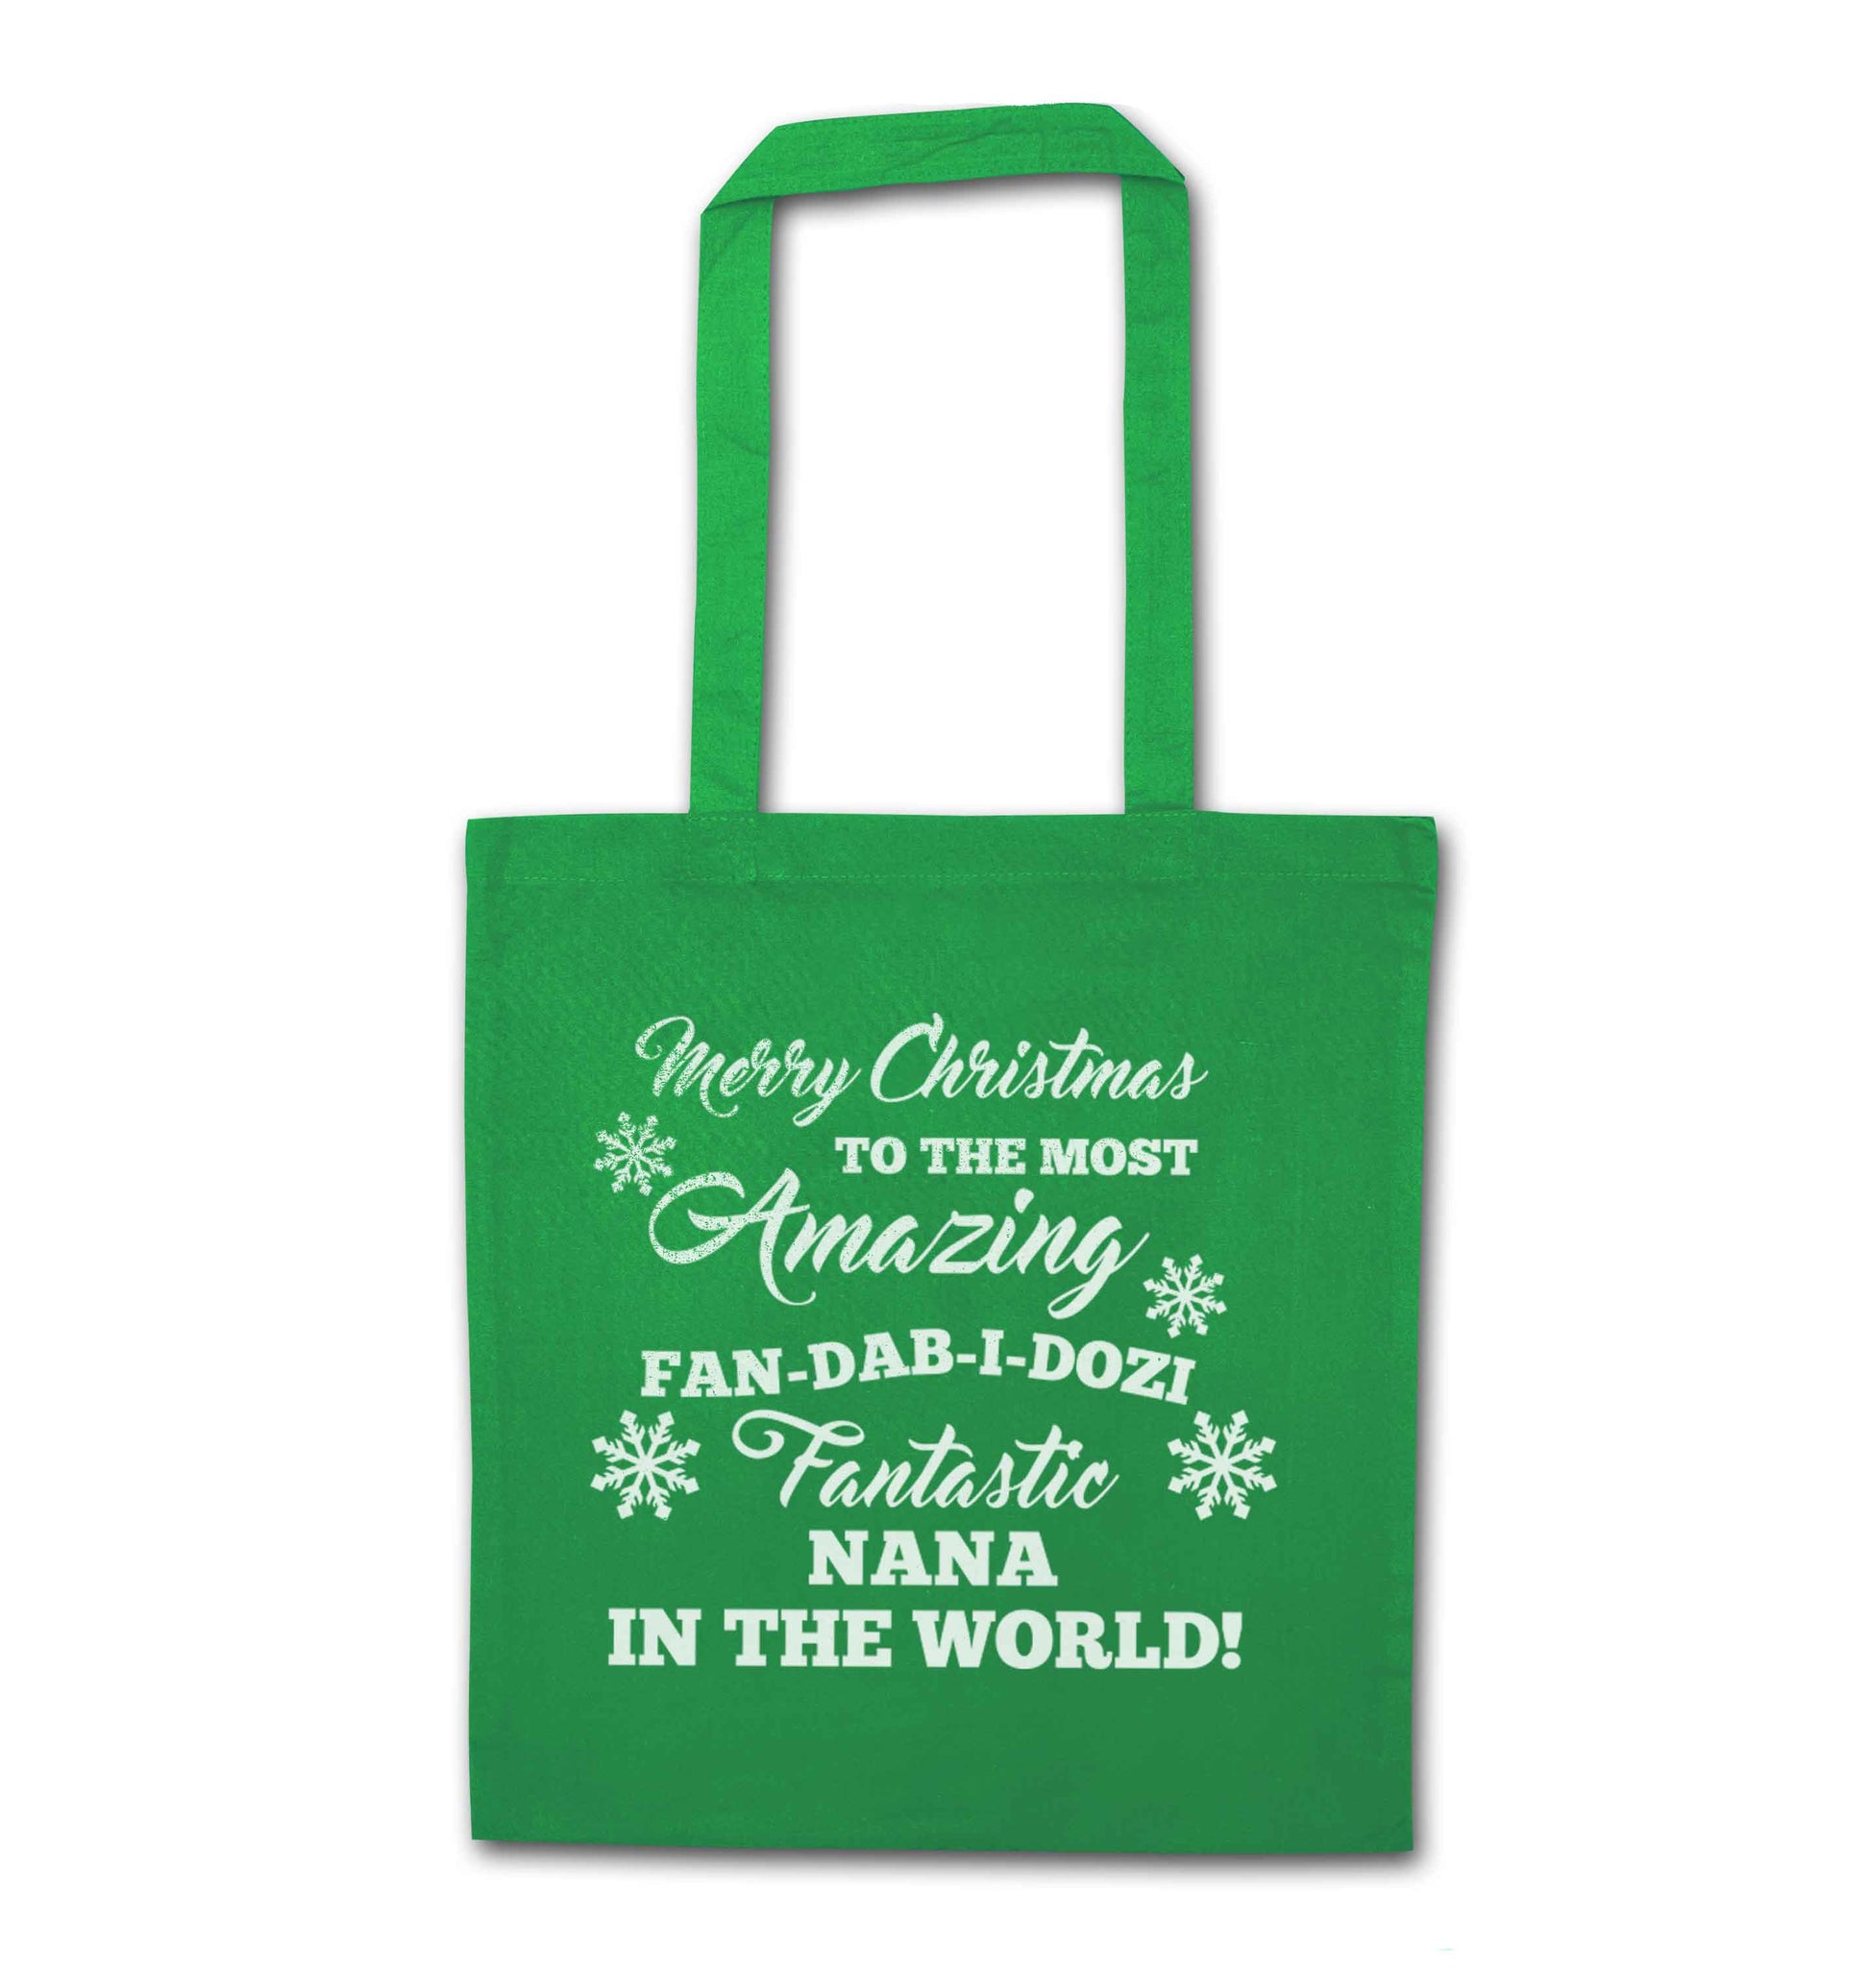 Merry Christmas to the most amazing fan-dab-i-dozi fantasic Nana in the world green tote bag